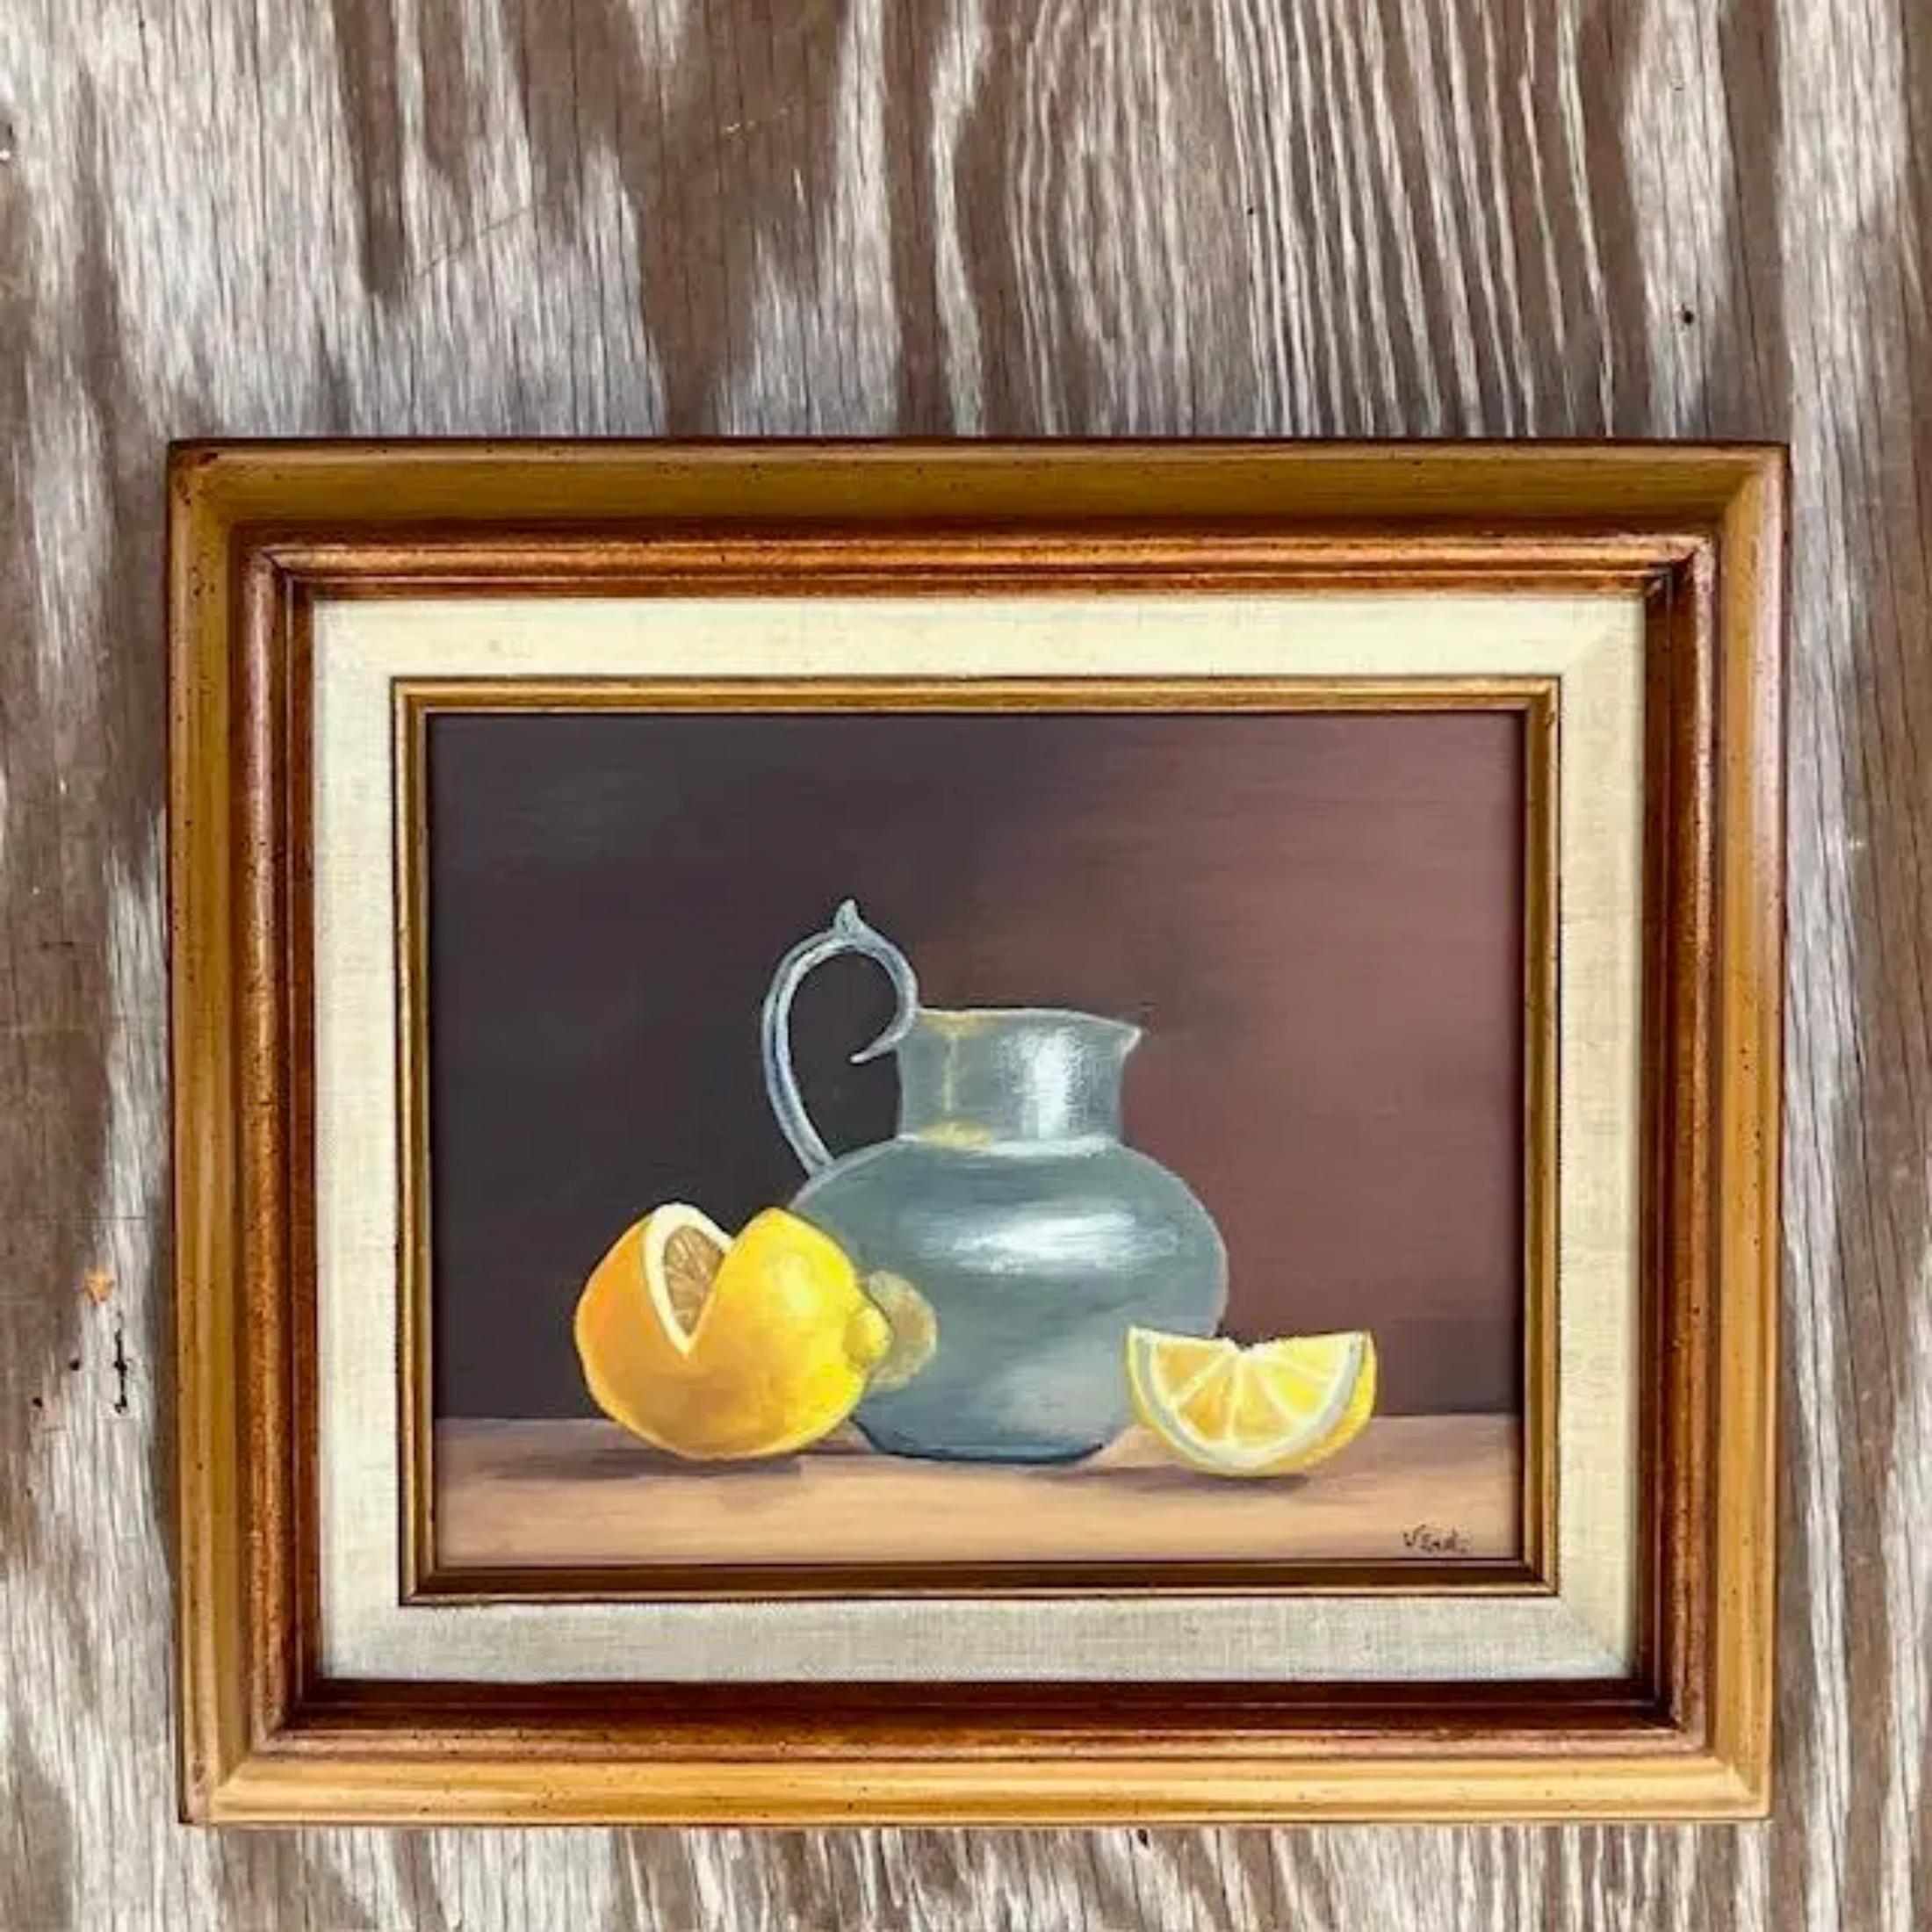 A fabulous vintage Boho original oil on canvas. A chic Still life composition of lemons and a pitched. Signed by the artist. Acquired from a Palm Beach estate.